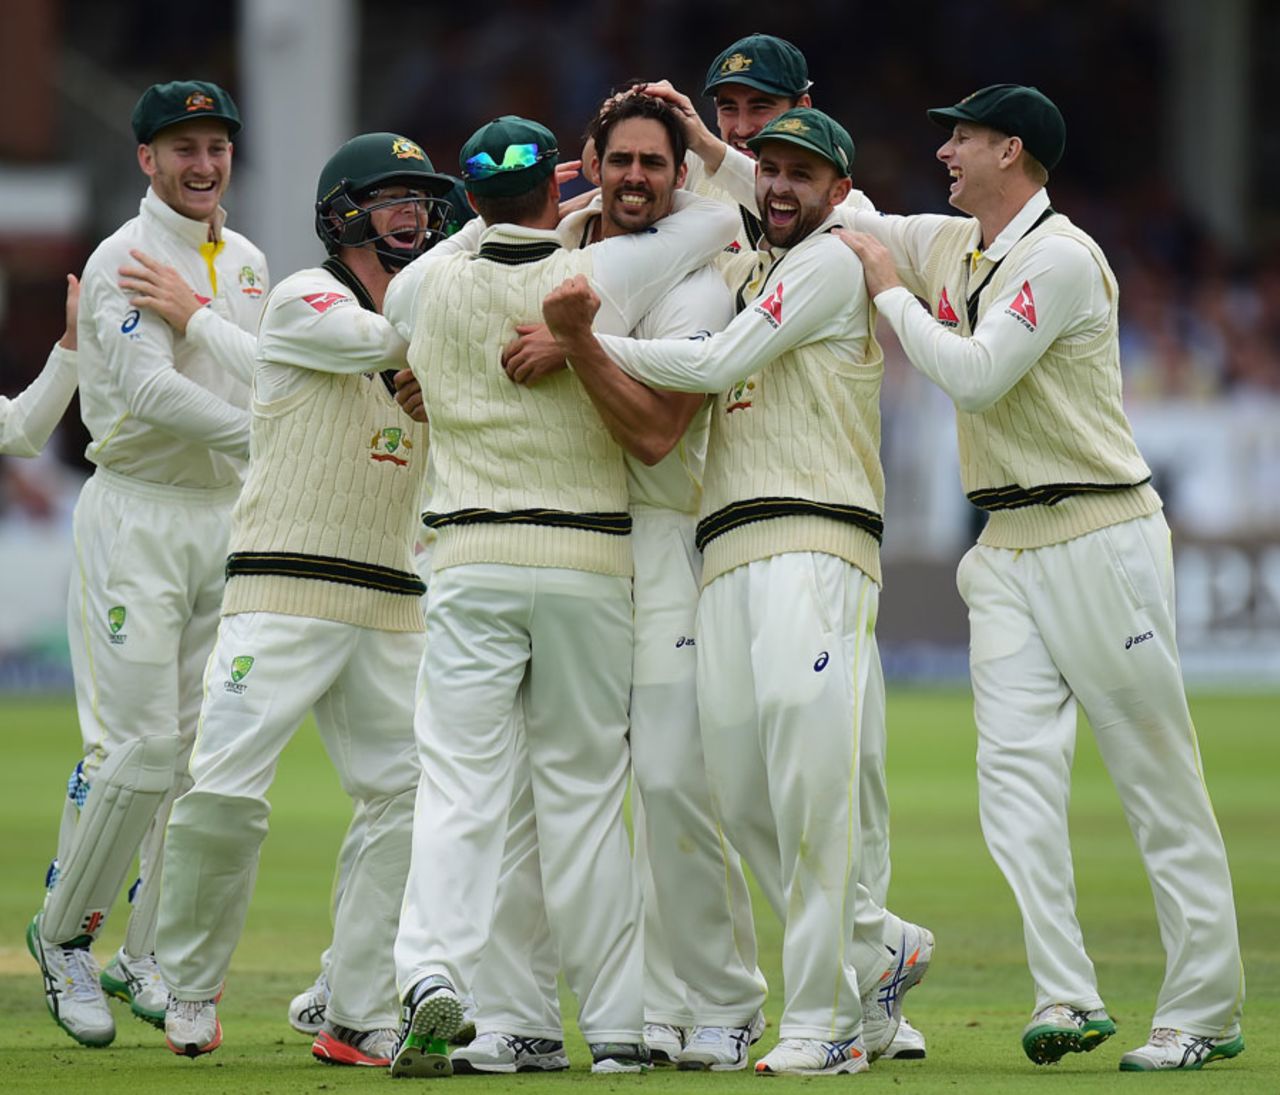 Australia were in jubilant mood as England slipped to 30 for 4, England v Australia, 2nd Investec Ashes Test, Lord's, 2nd day, July 17, 2015